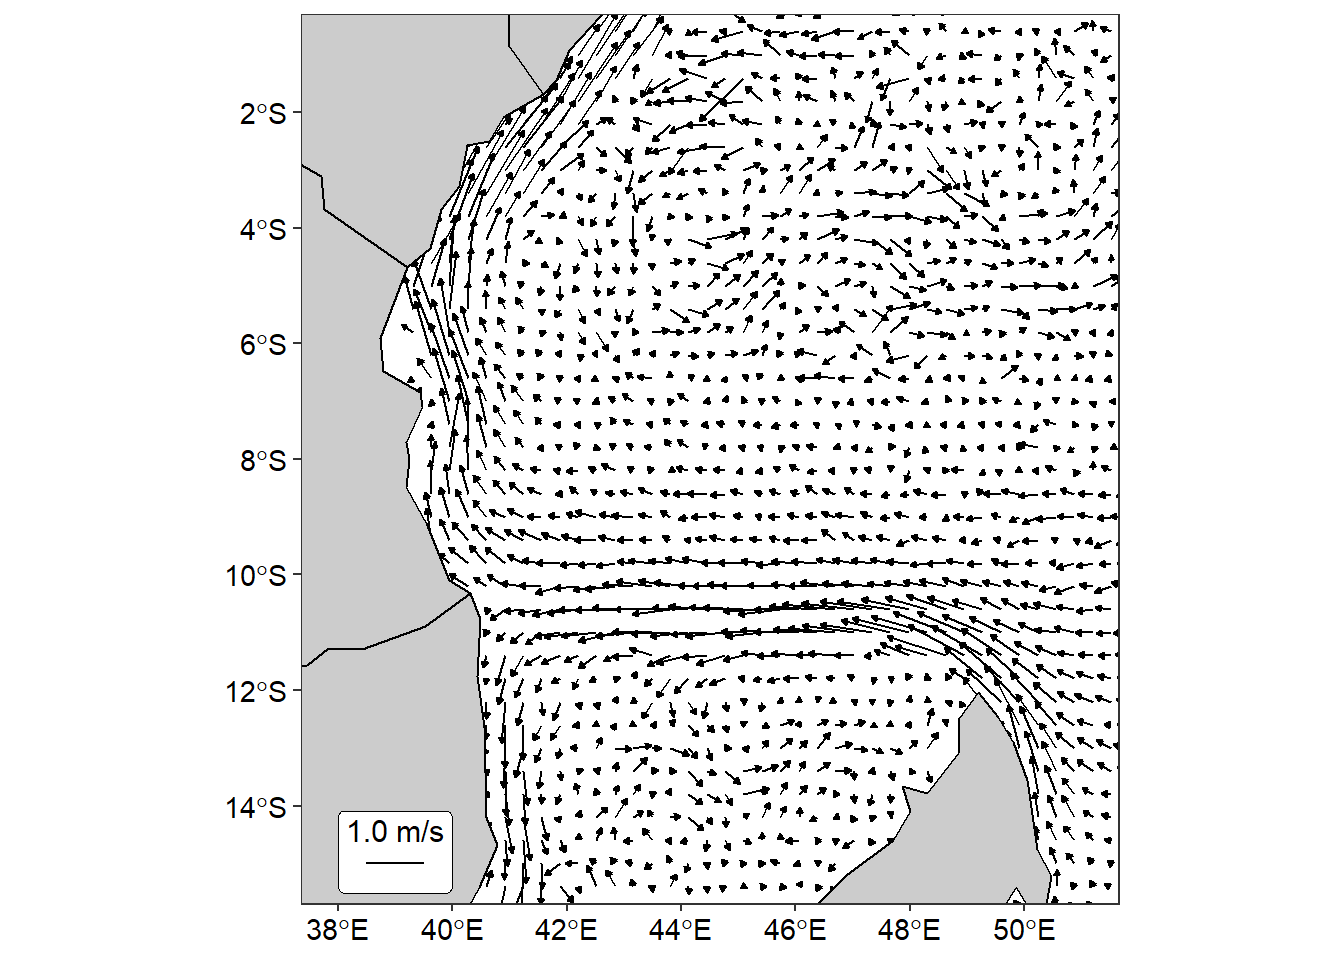 Climatological mean of near-surface currents derived from satellite-tracked drifter trajectories